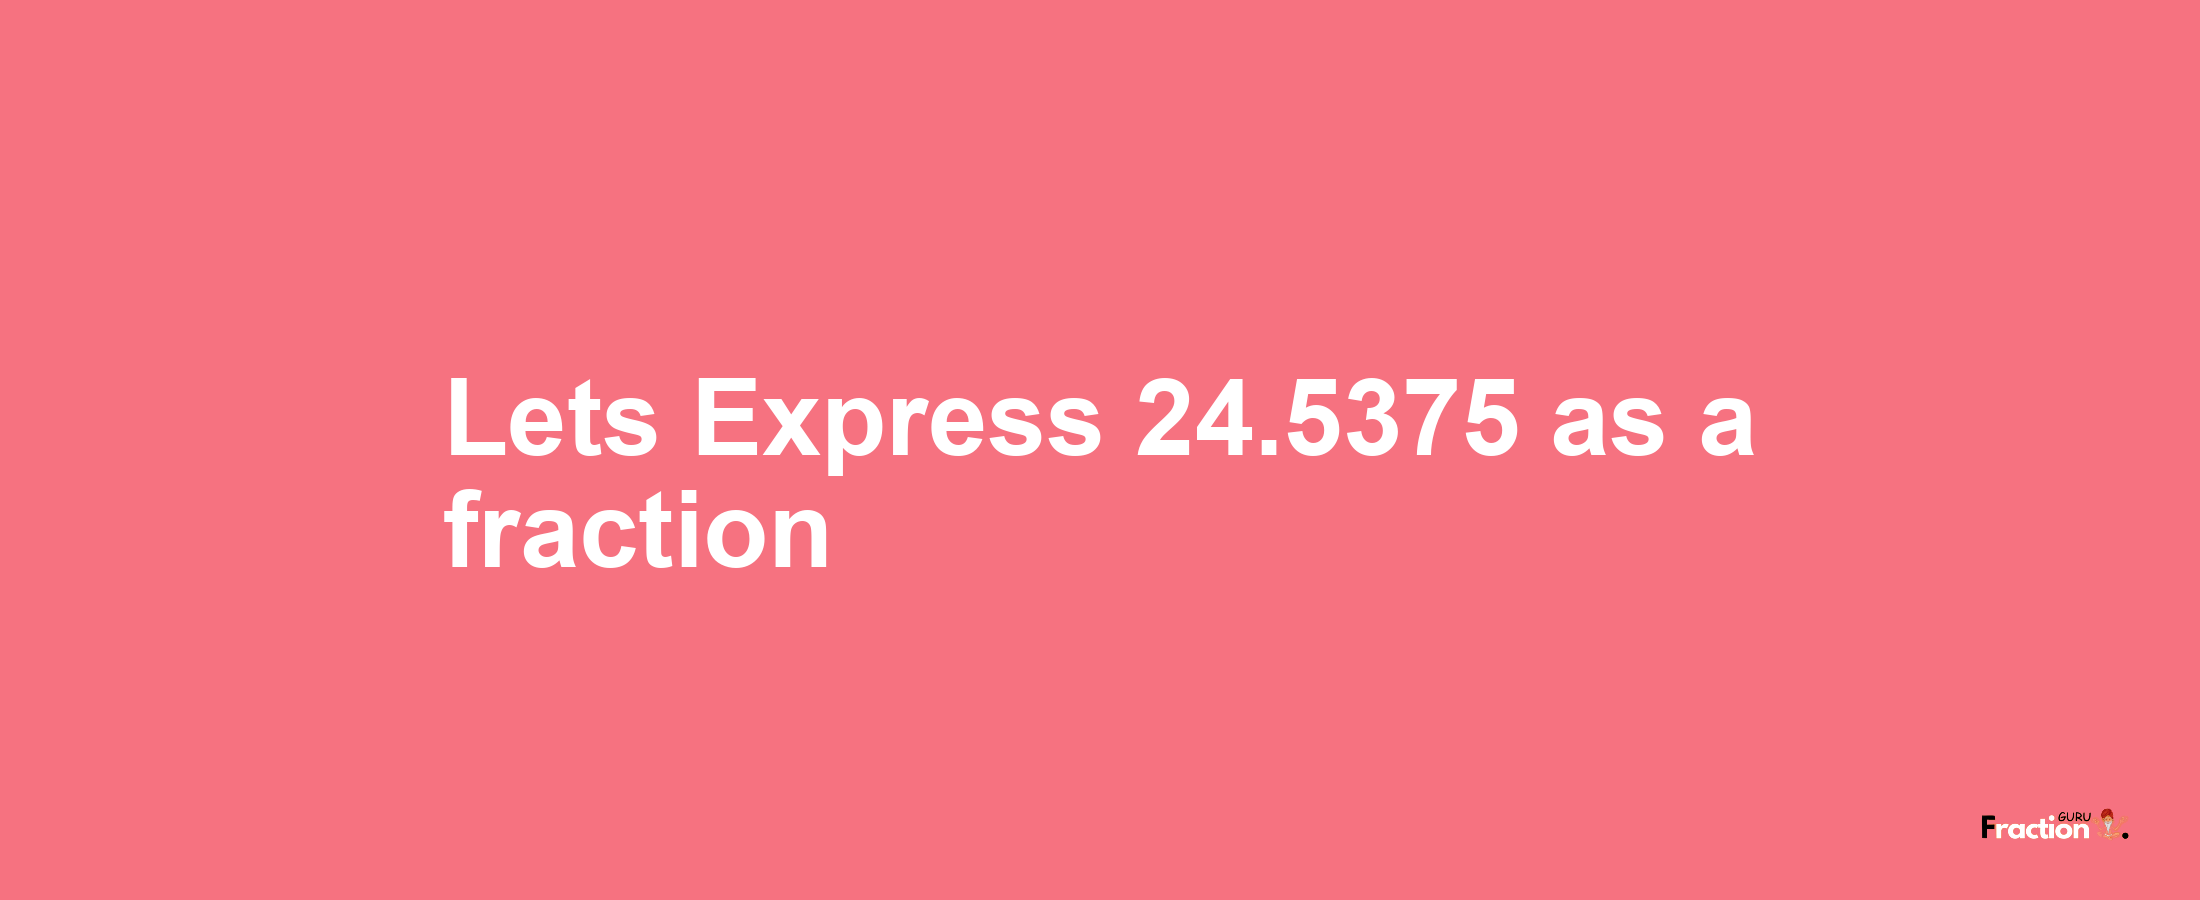 Lets Express 24.5375 as afraction